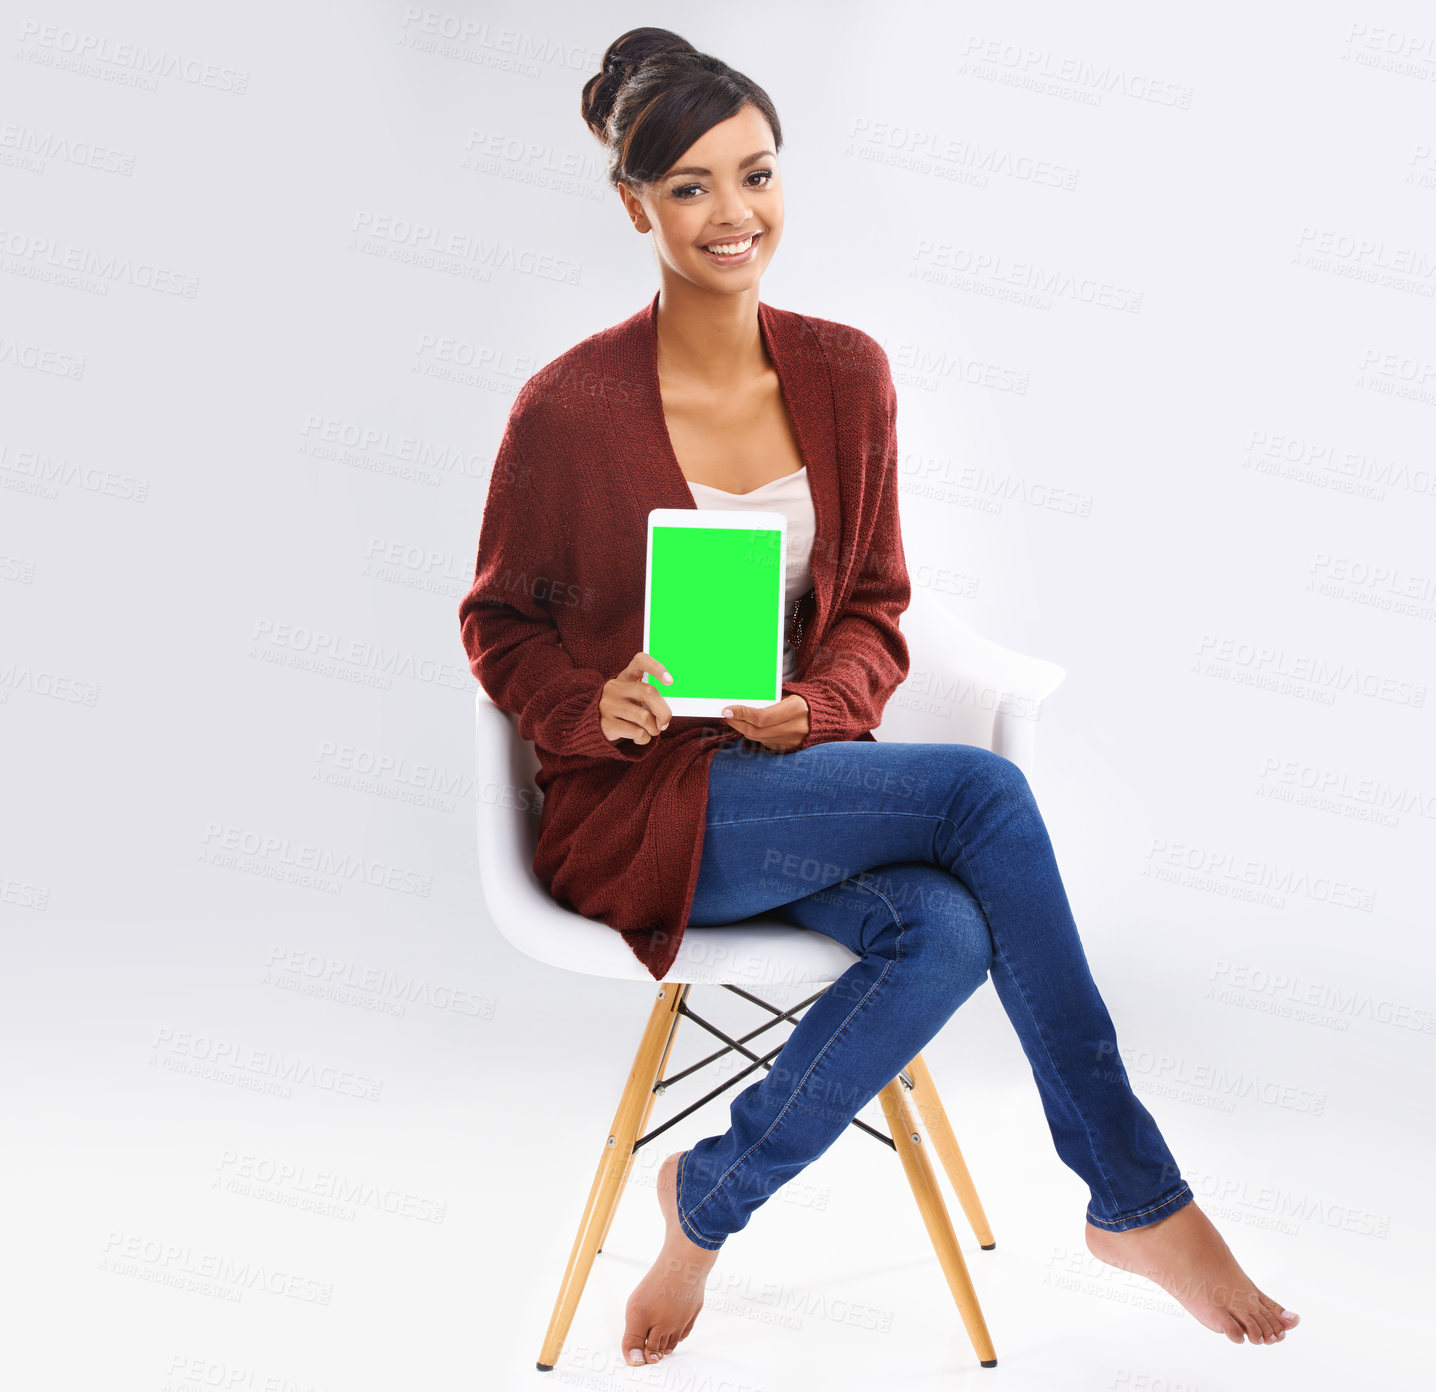 Buy stock photo Studio portrait of an attractive young woman sitting on a chair holding a digital tablet